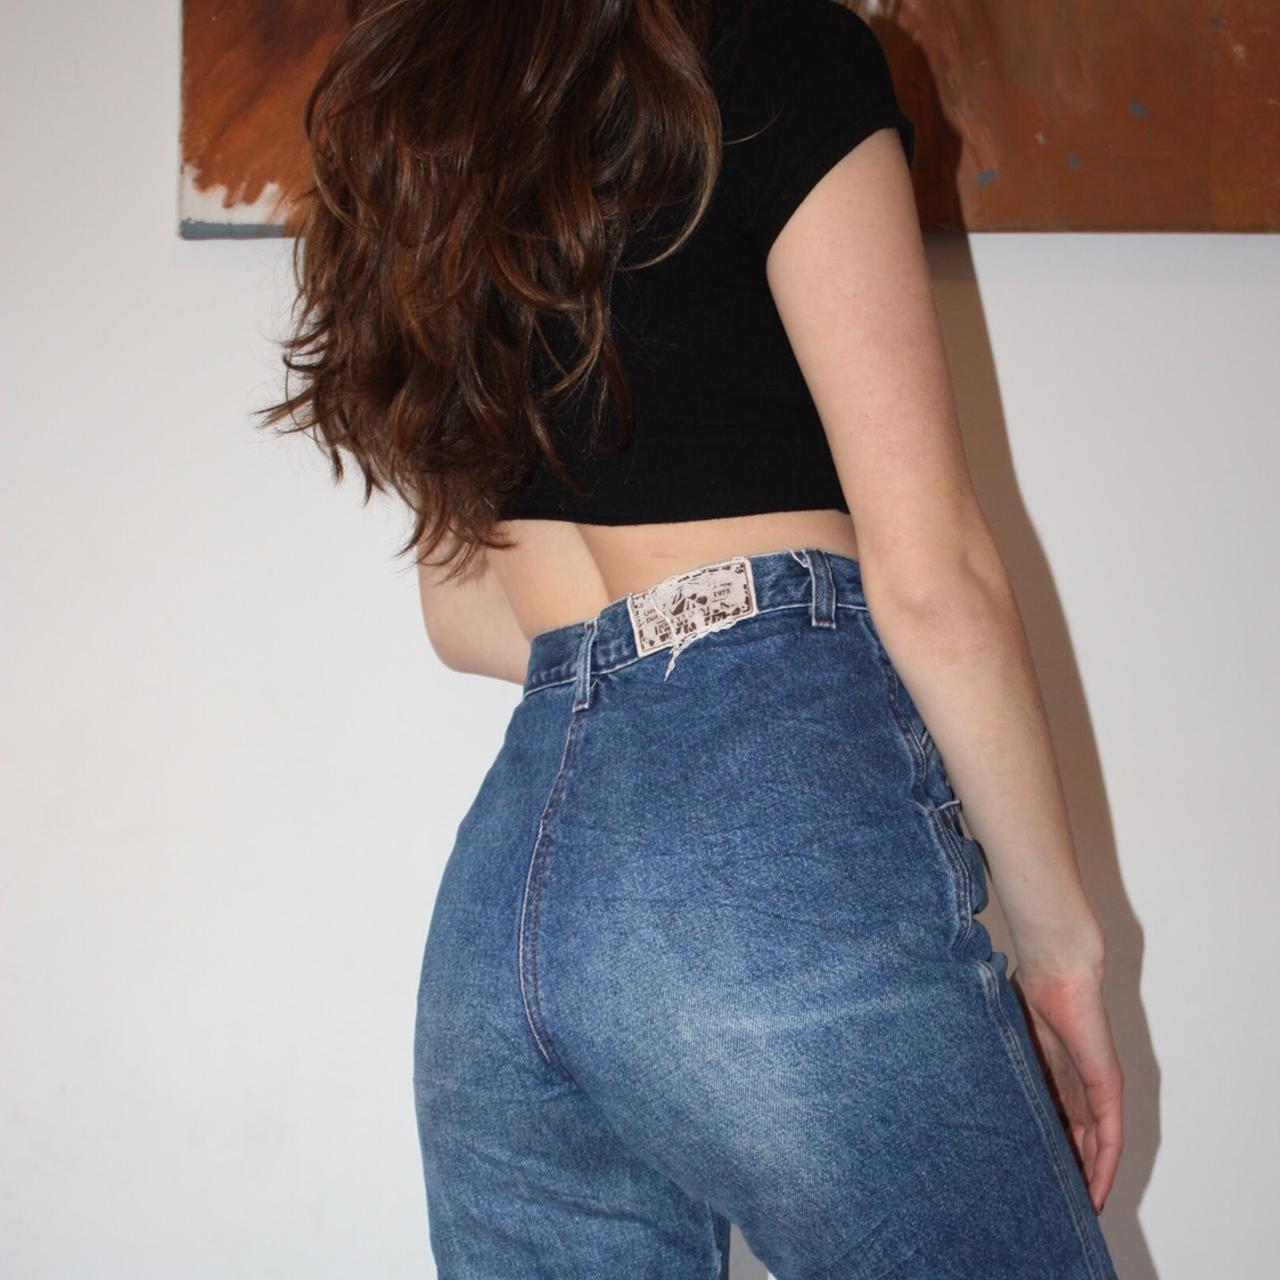 Could someone help me price these Rockies jeans? : r/Depop